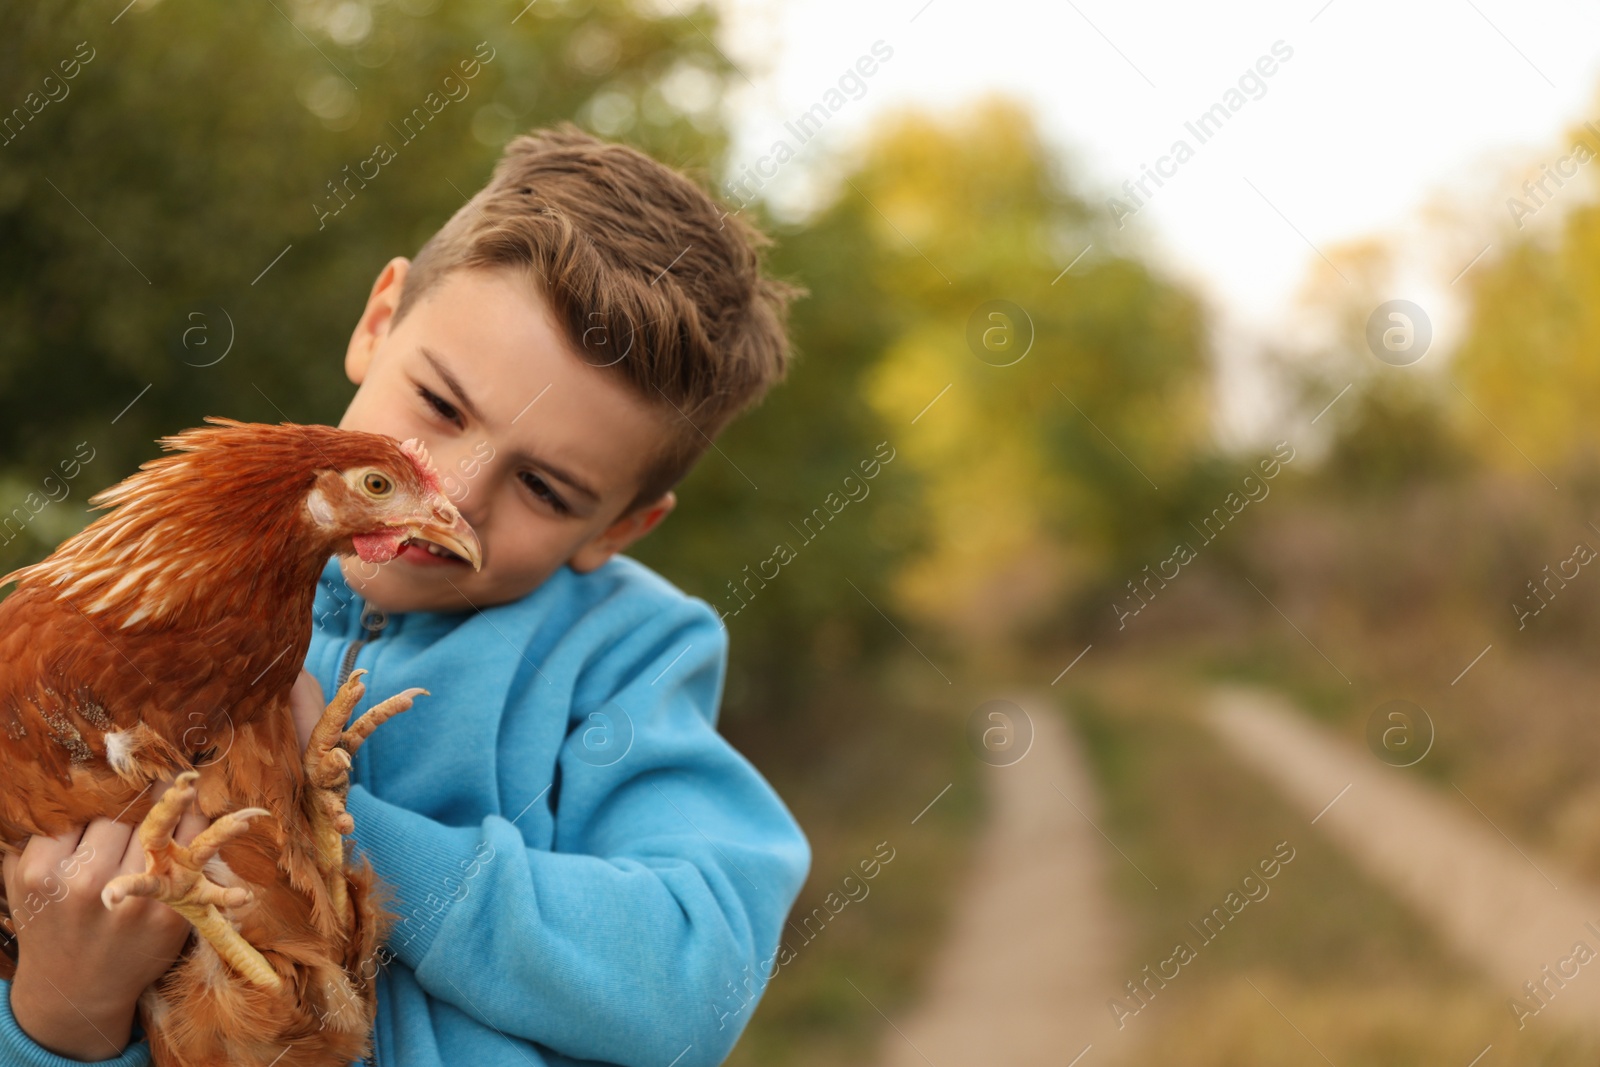 Photo of Farm animal. Cute little boy holding chicken in countryside, space for text